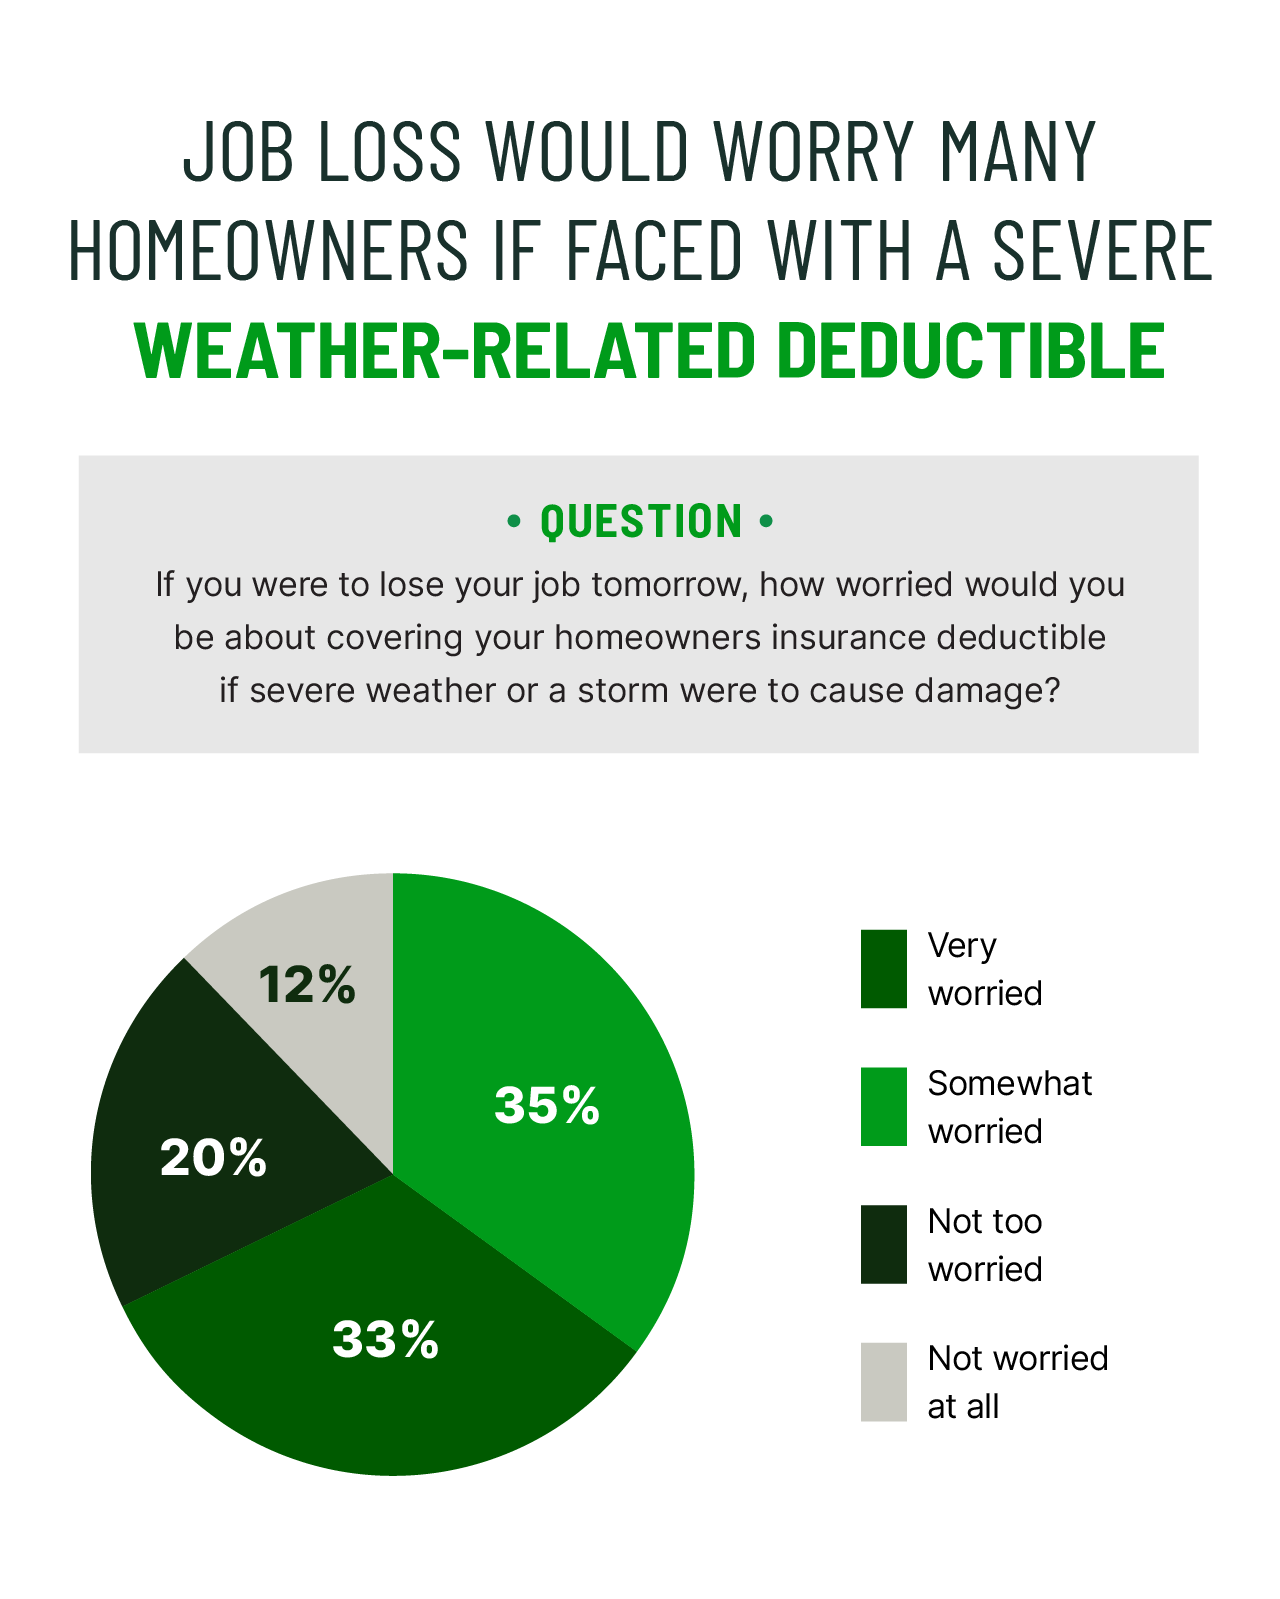 pie chart explaining how many homeowners would feel worried about paying a severe-weather related deductible if they lost their job